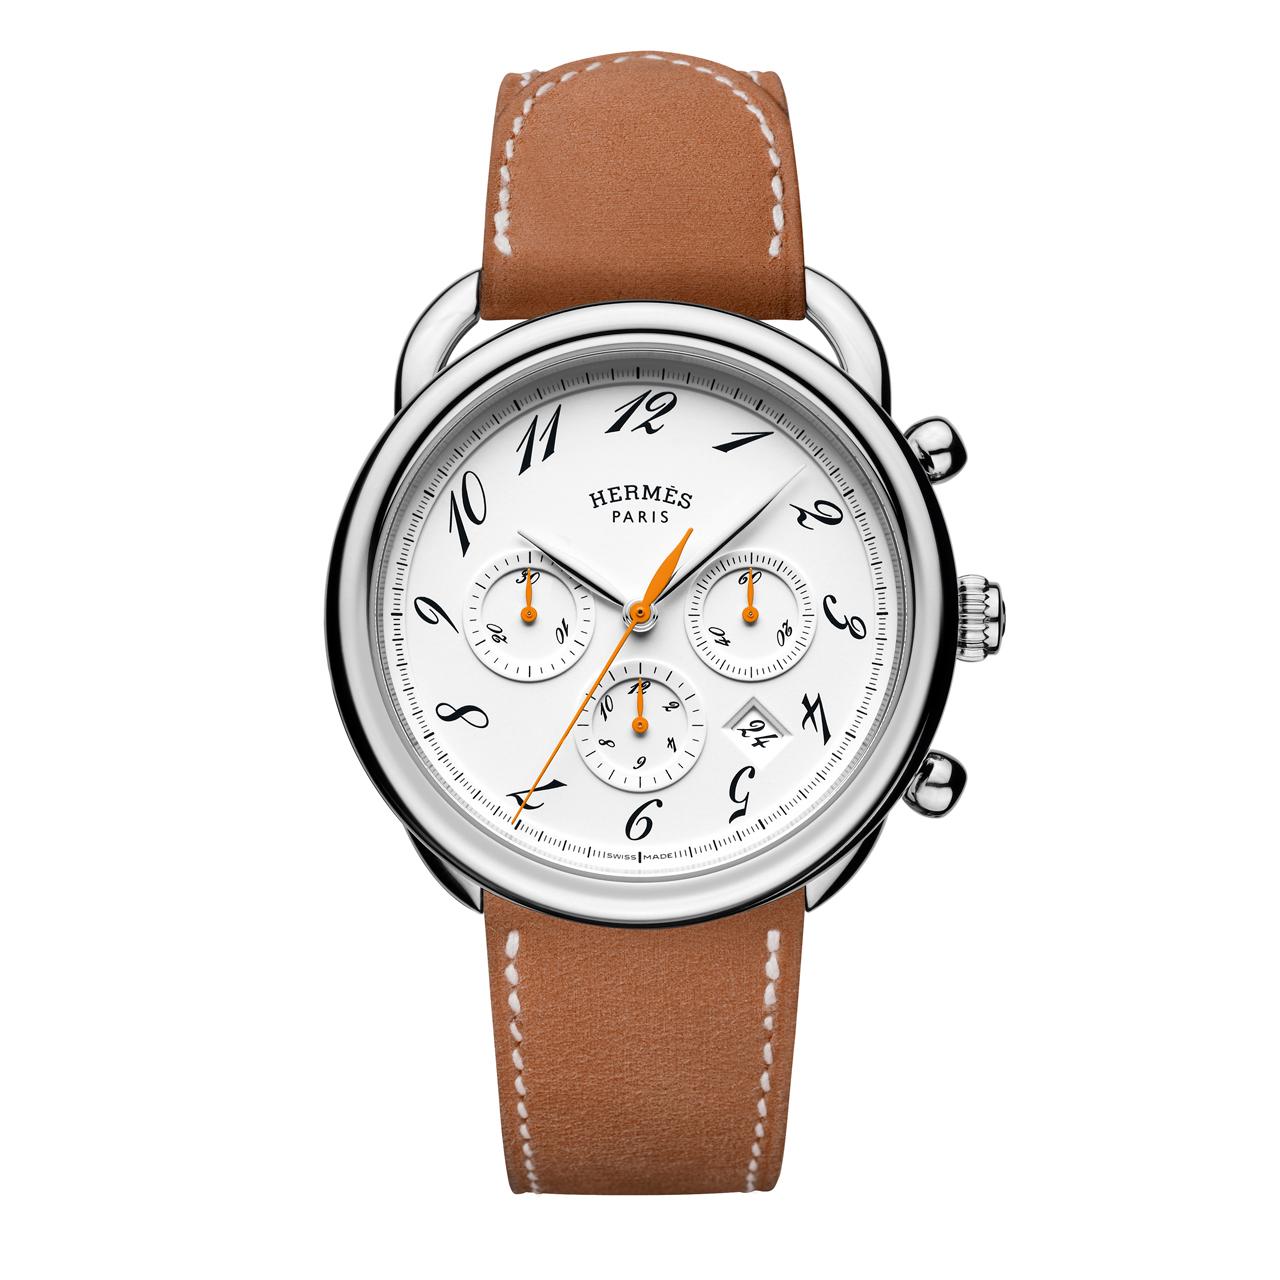 Hermes Arceau Chronograph. 43mm Stainless steel round case. Leather strap. Automatic movement.
White dial, three white counters, hour totalizer at 6 o'clock, minute totalizer at 9 o'clock, small seconds at 3 o'clock. Original box and papers. 